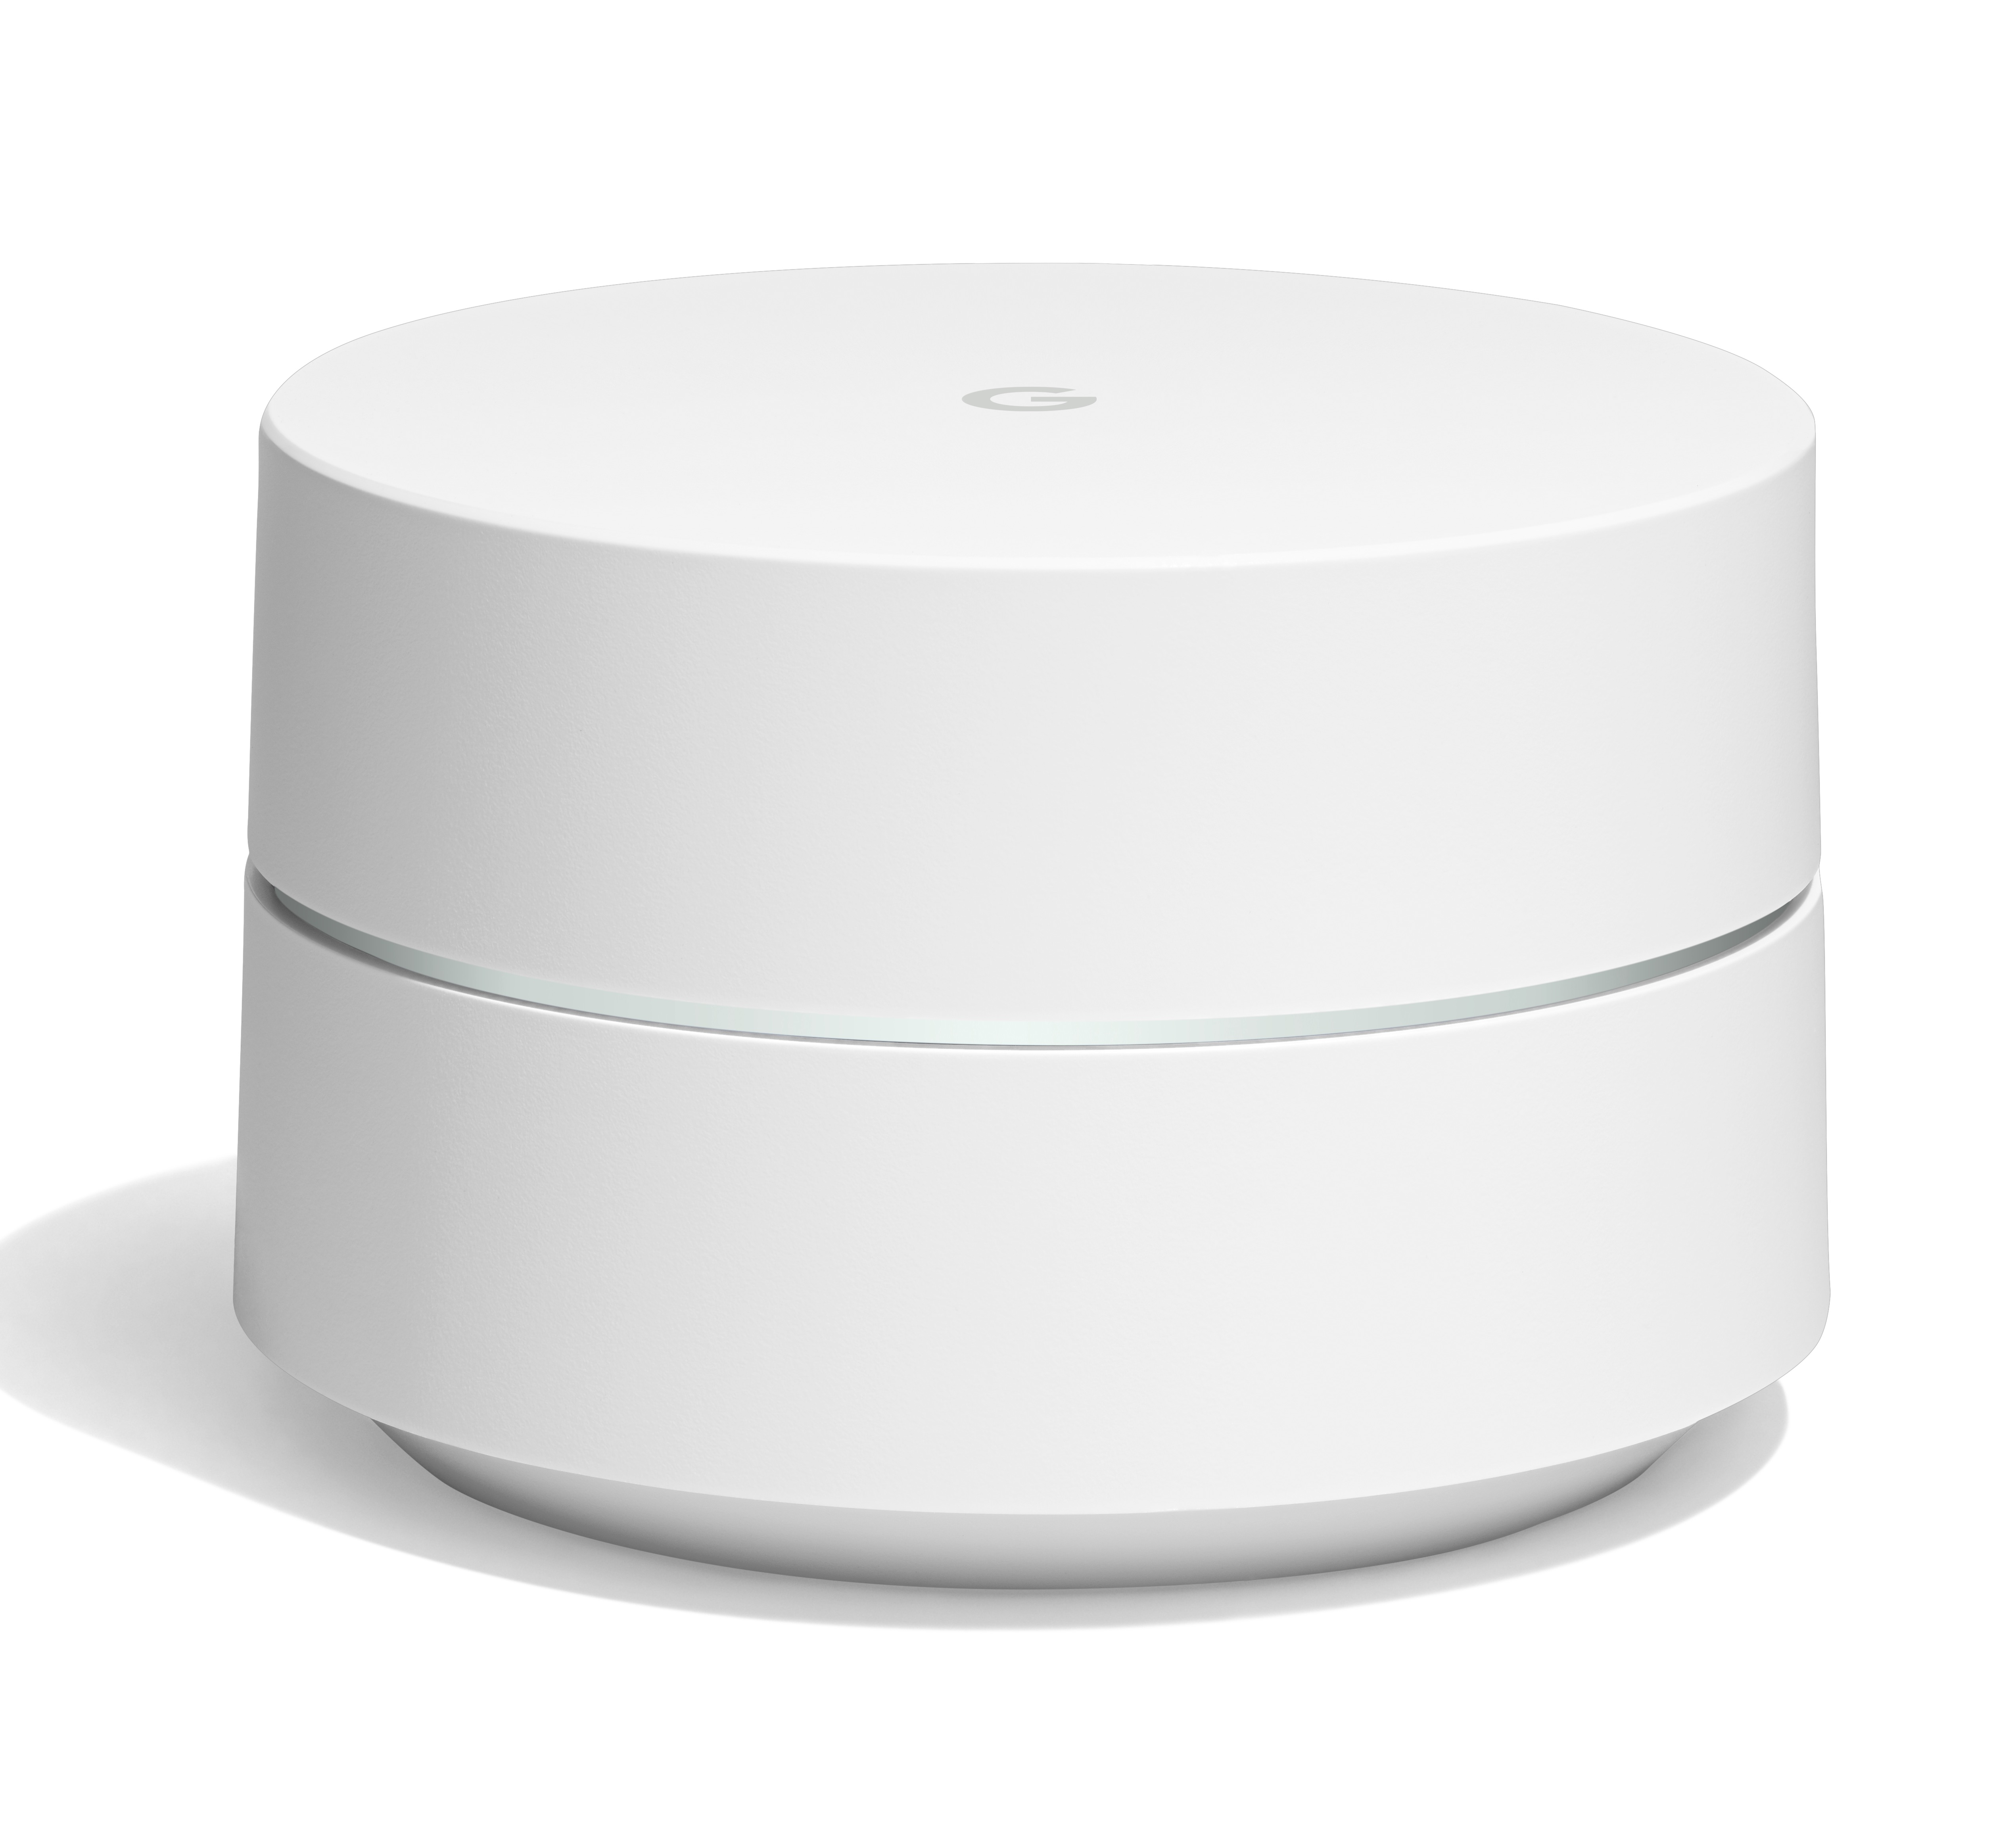 Google Wifi - 1 Pack - Mesh Router Wifi, White - image 1 of 4